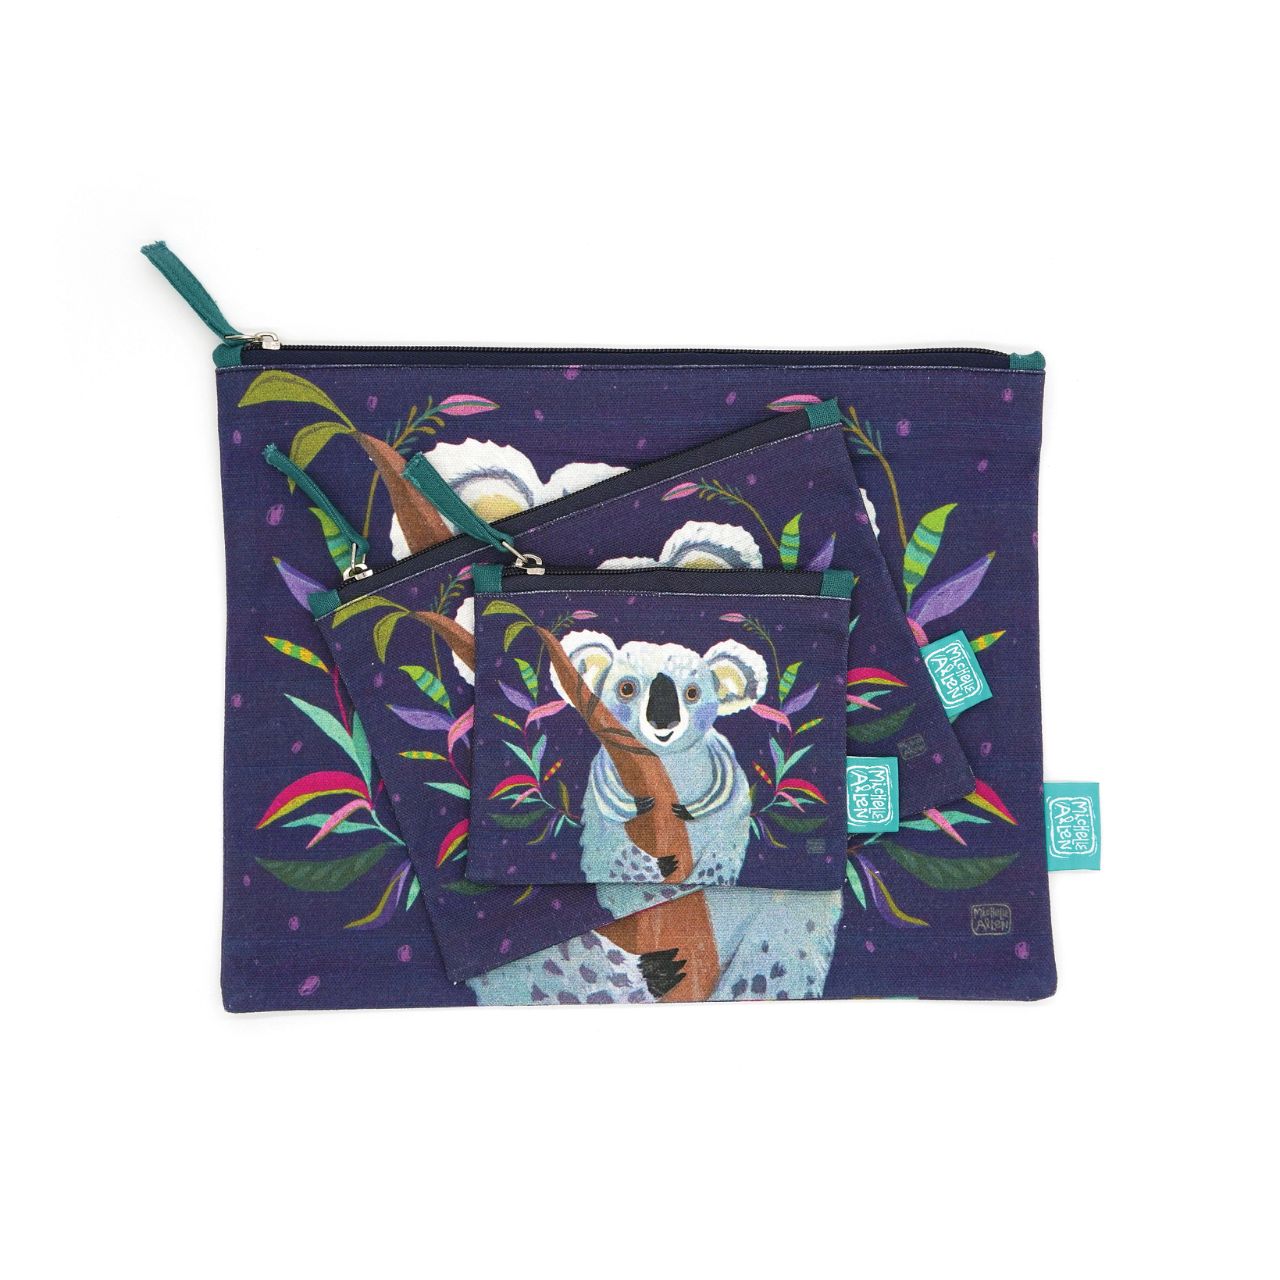 Michelle Allen Koala Zipped Pouch Medium  These beautiful zippered 100% Cotton pouches are perfect for pencils/pens, trinkets, charging cords, make up or pretty much anything you can possibly think of. Exclusively designed by Michelle Allen.